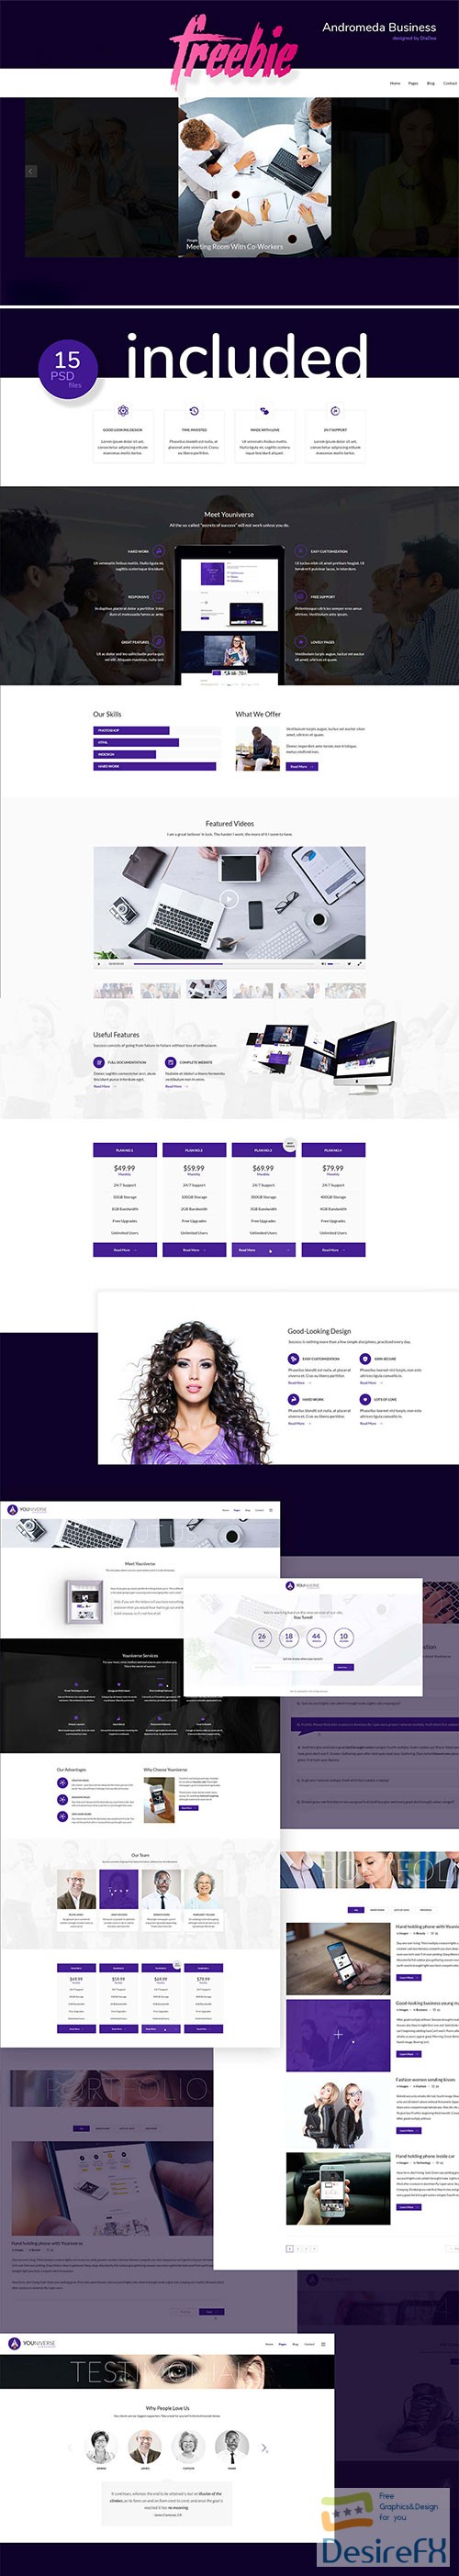 Andromeda Business Template